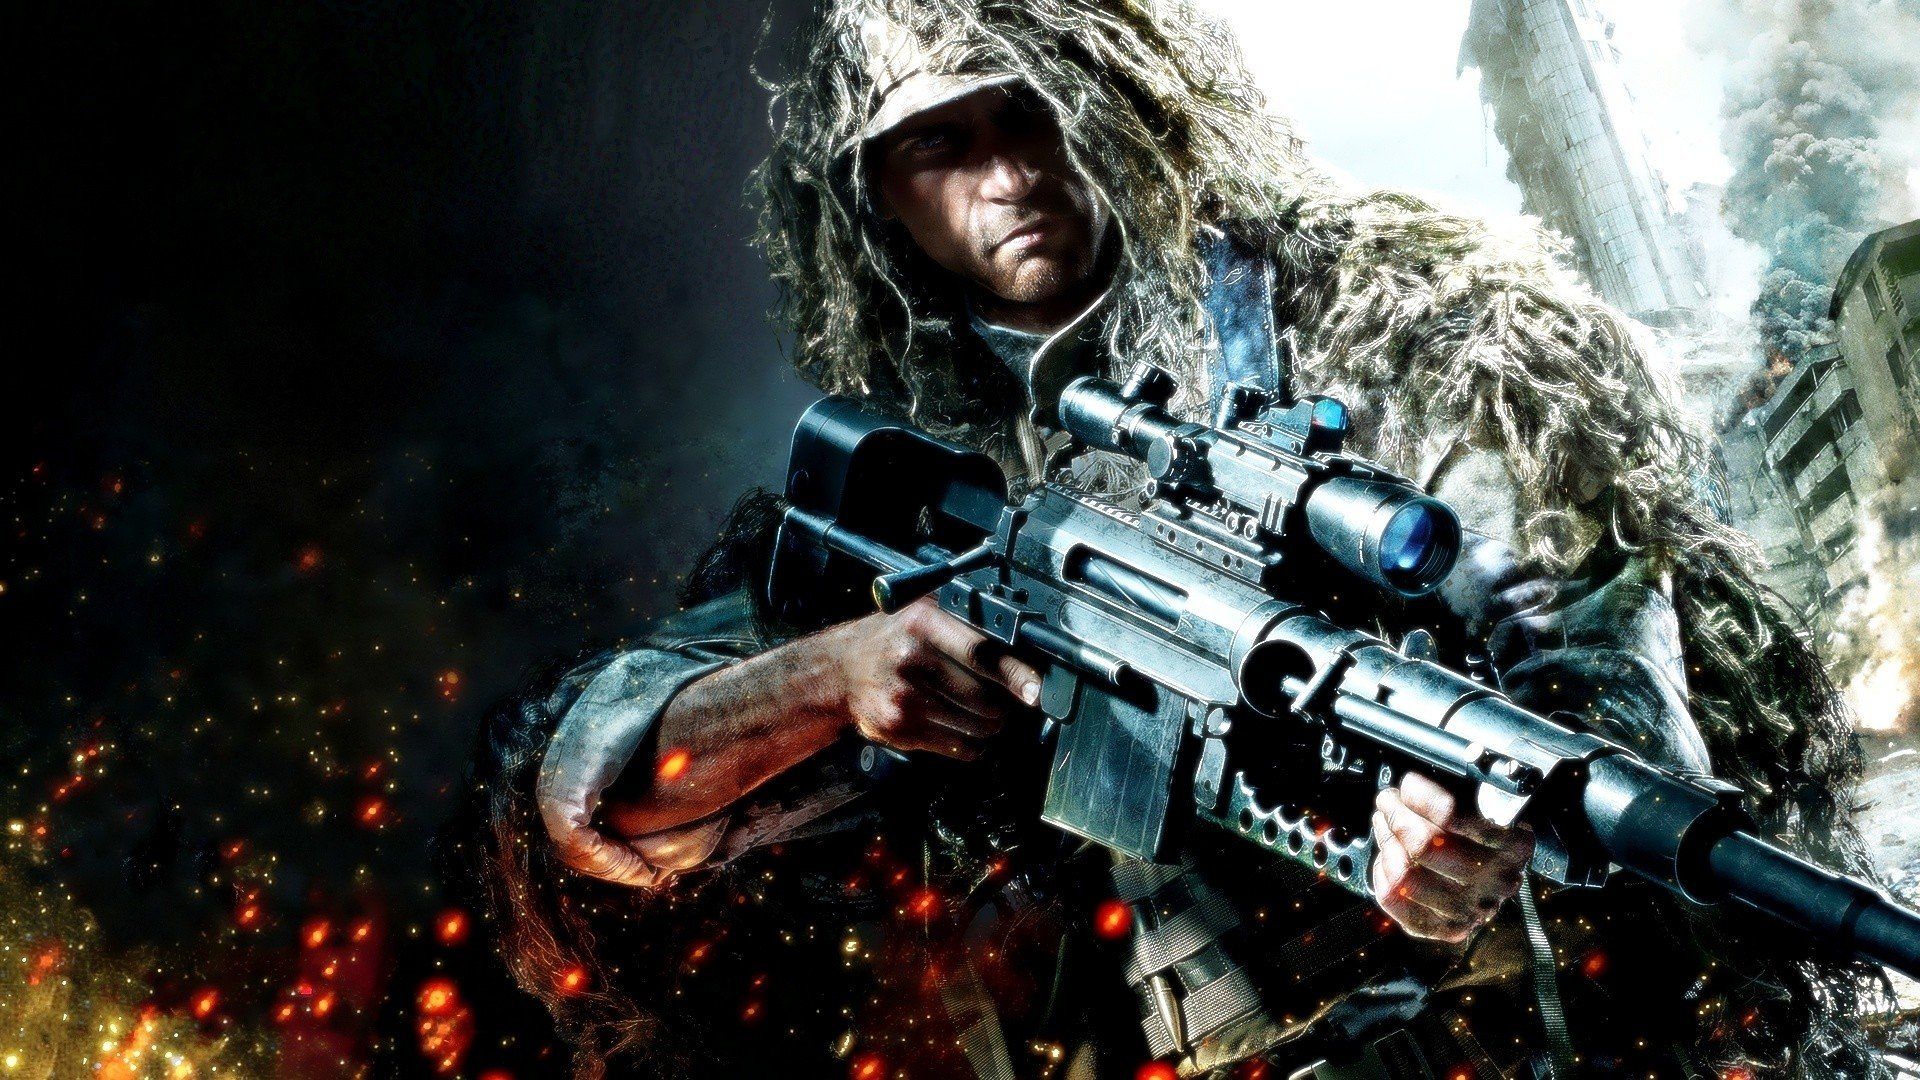 Rifles soldiers video games ruins army military snipers buildings sniper rifles special forces wallpaperx1080